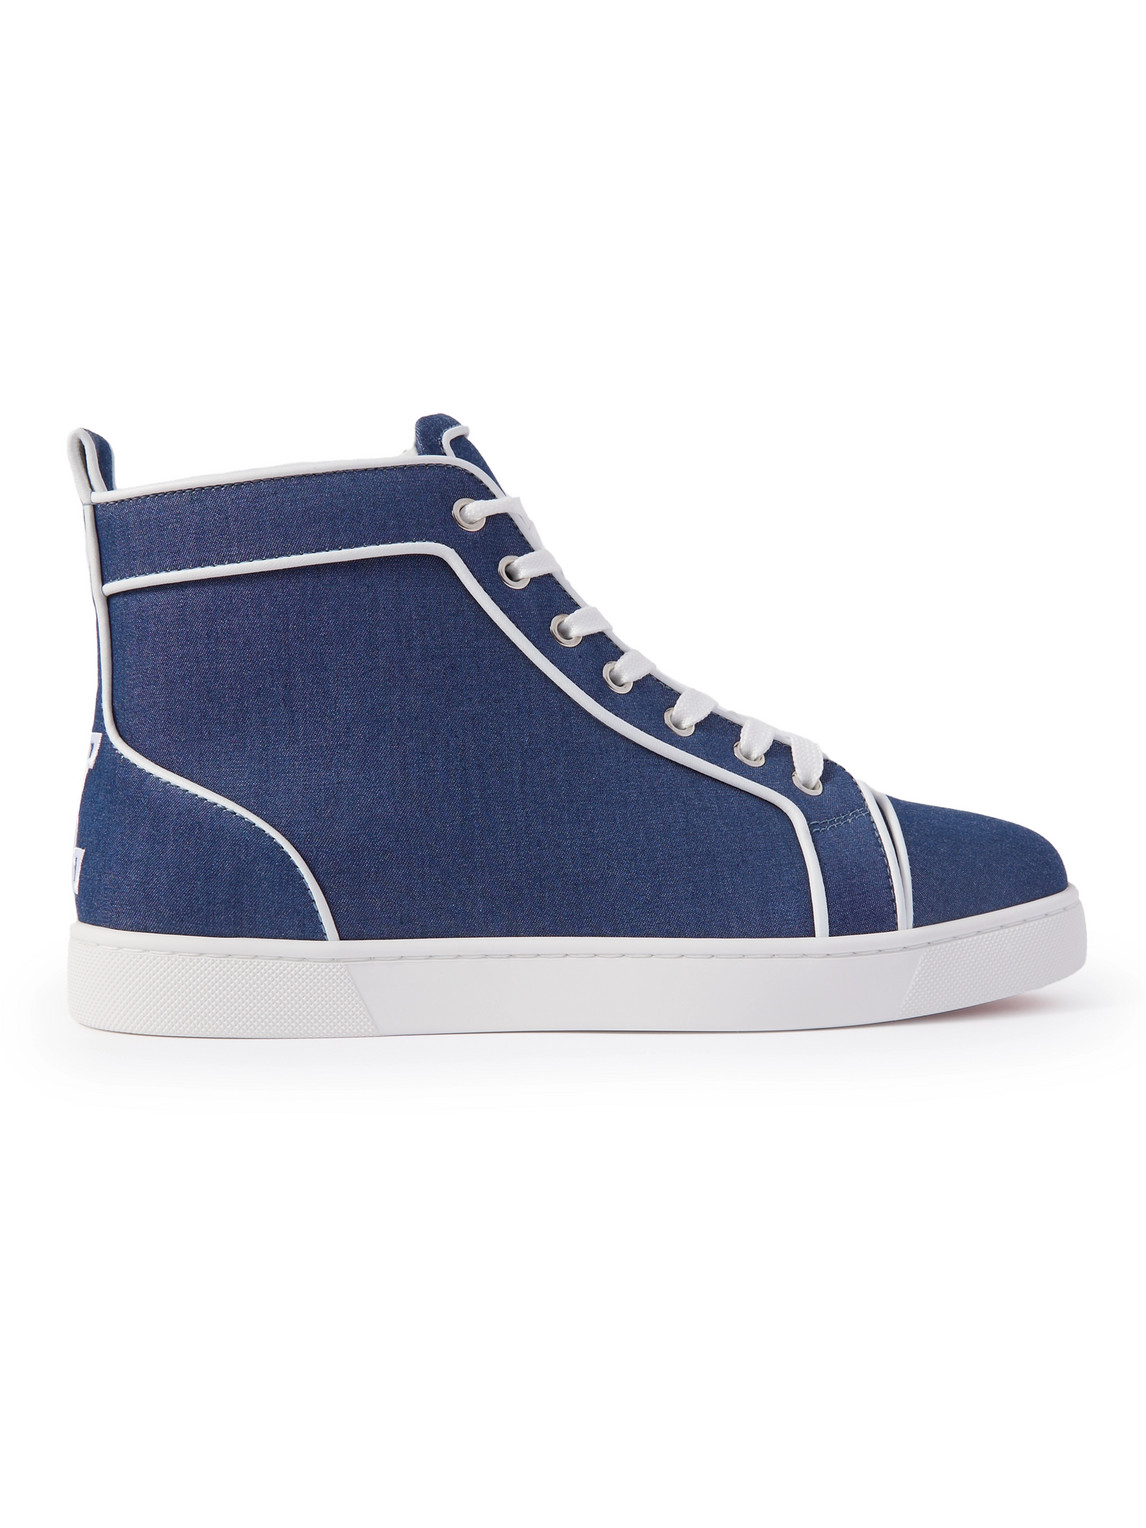 Christian Louboutin Varsilouis High Top Trainer In Blue